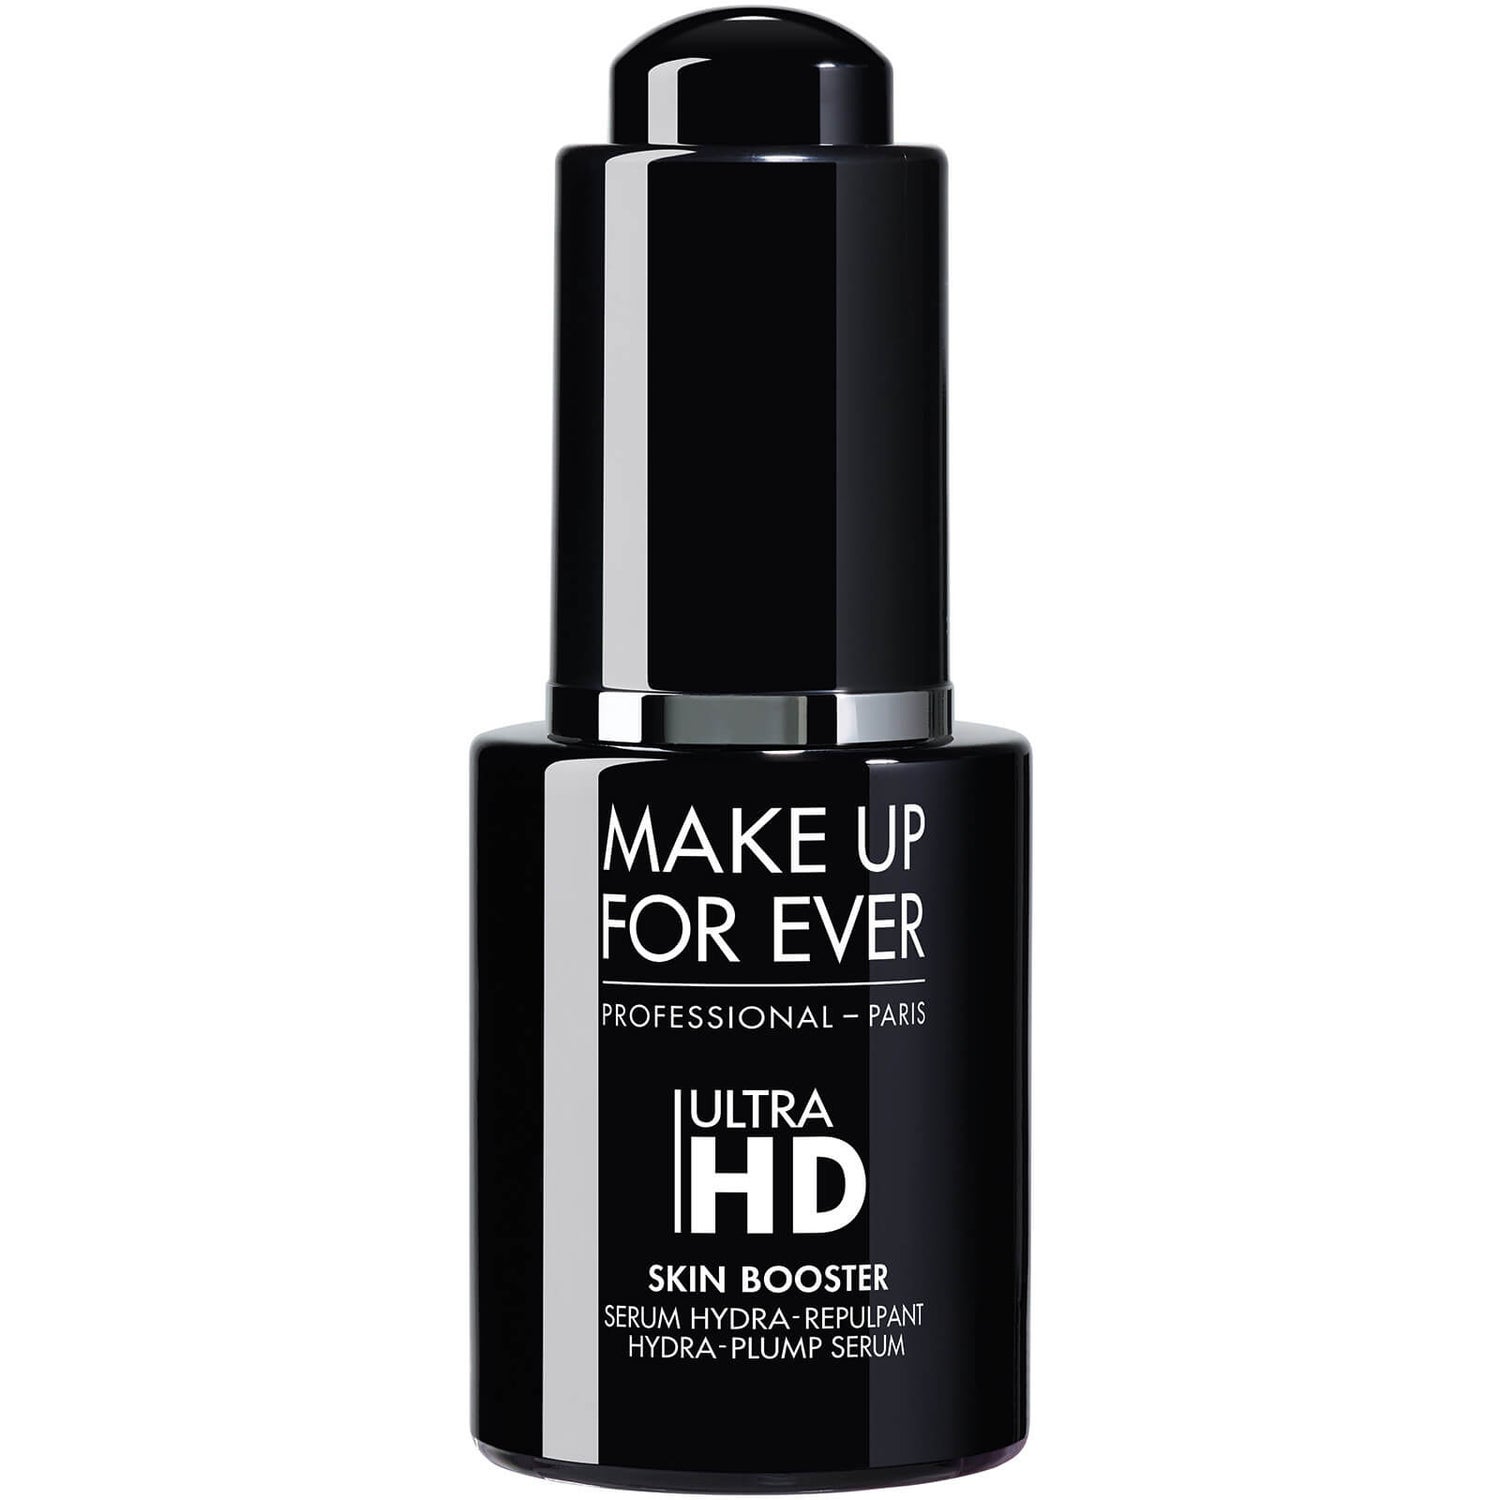 MAKE UP FOR EVER ultra Hd Skin Booster 12ml -